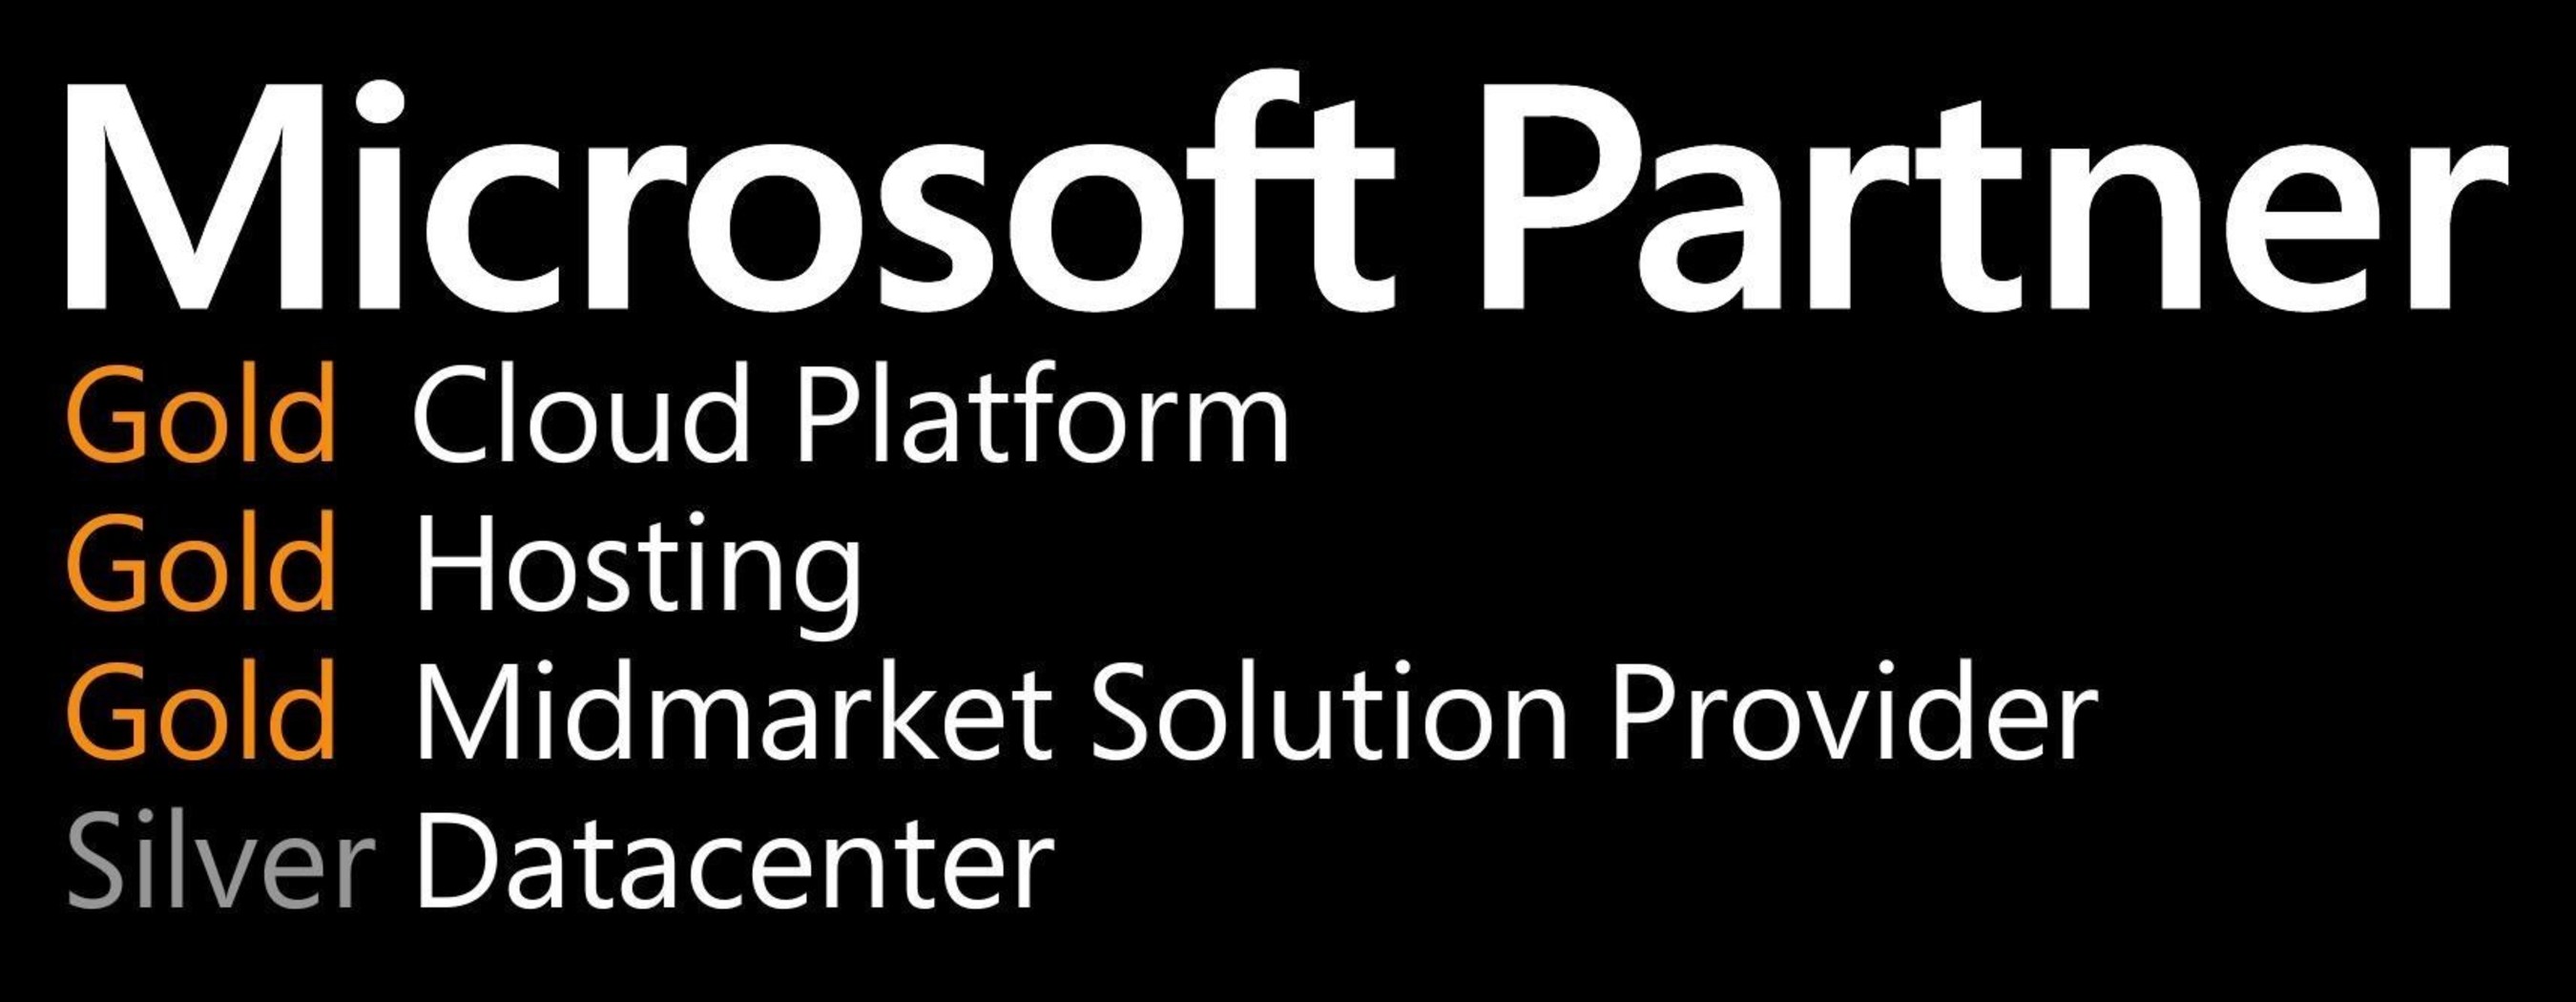 The Cloud Platform Microsoft Partner competency highlights Microsoft's continuing evolution to a Cloud based company.